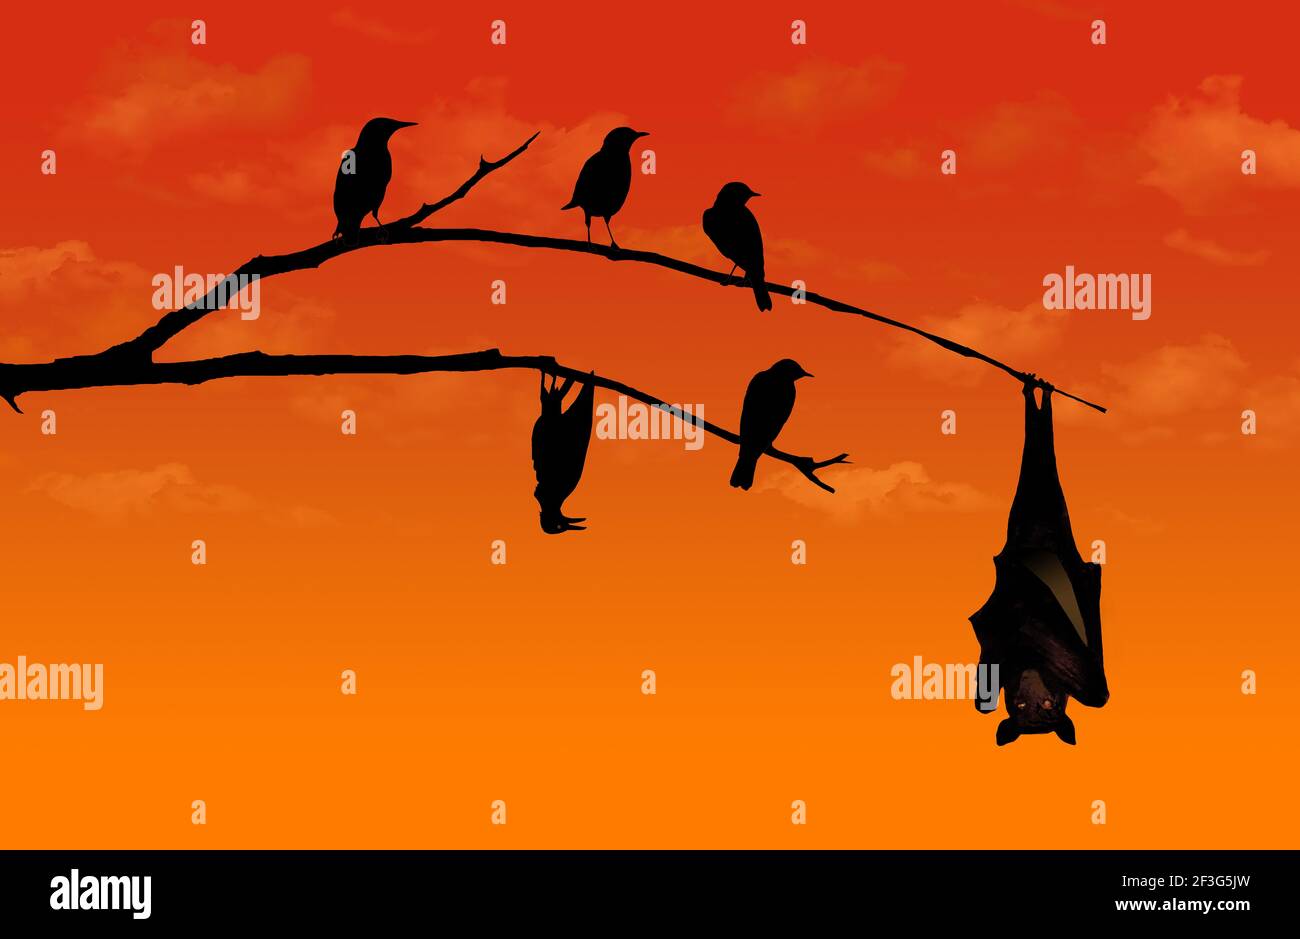 A bird imitates a bat and hangs from a branch upside down in this illustration about imitation. Stock Photo